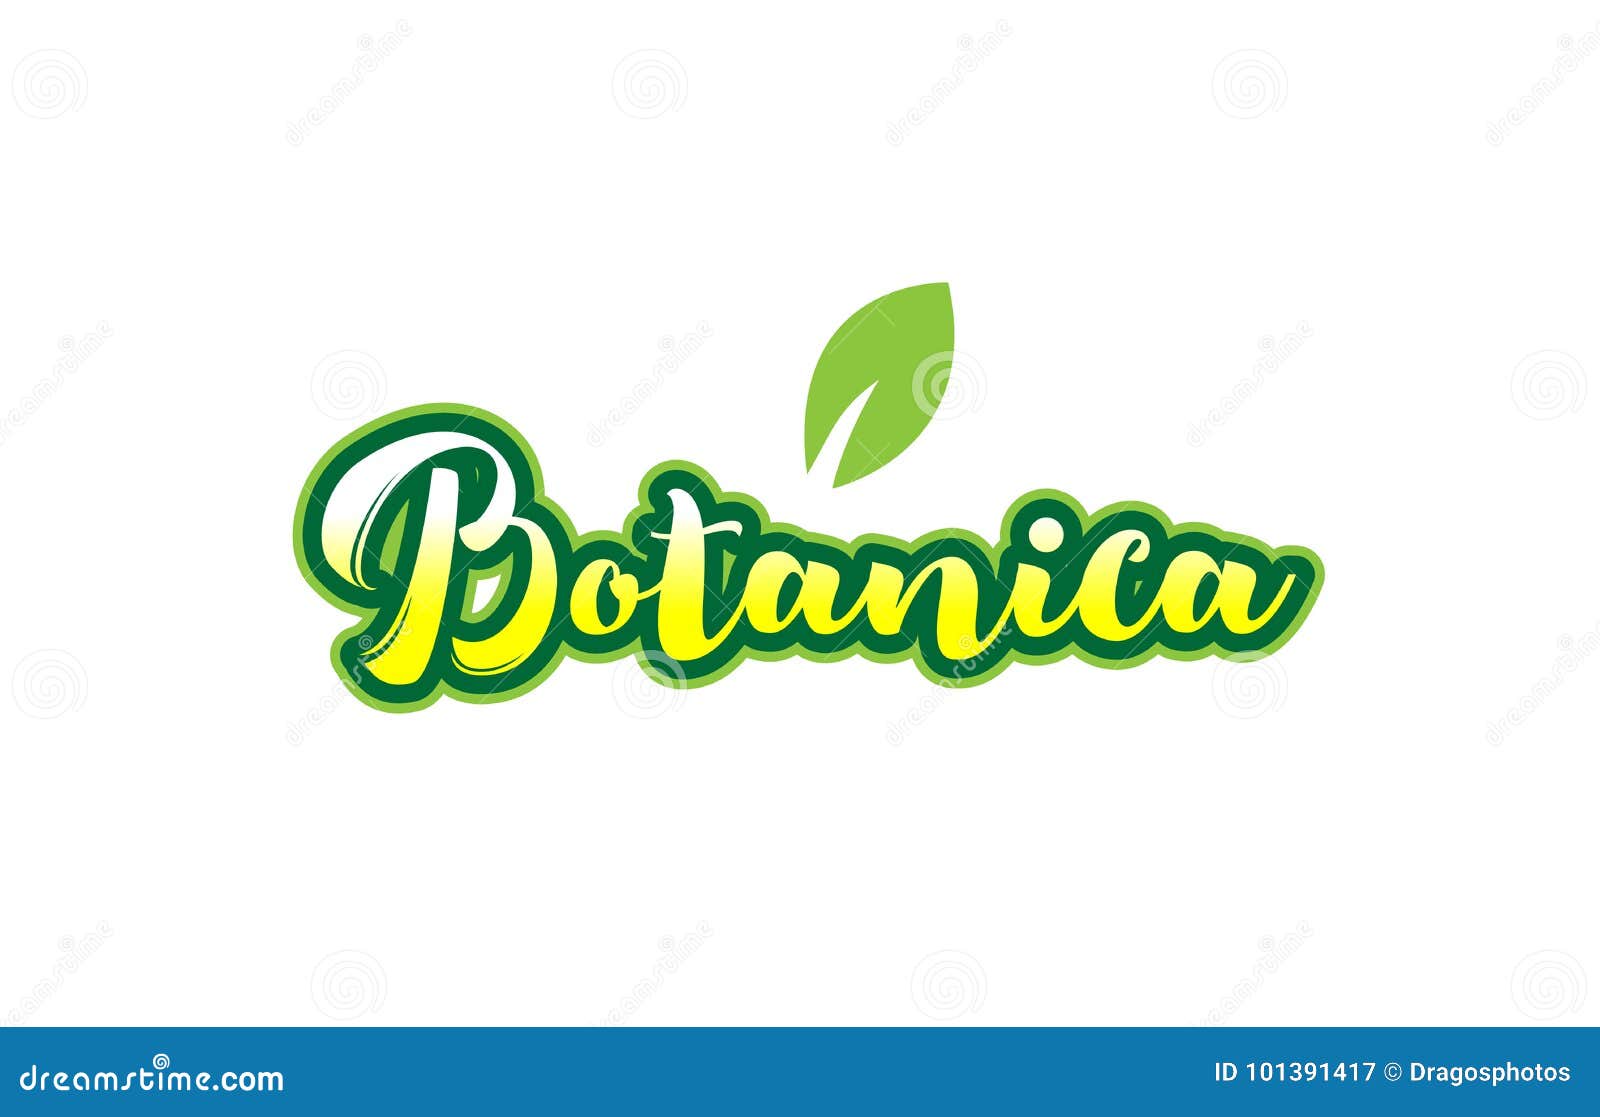 botanica word font text typographic logo  with green leaf